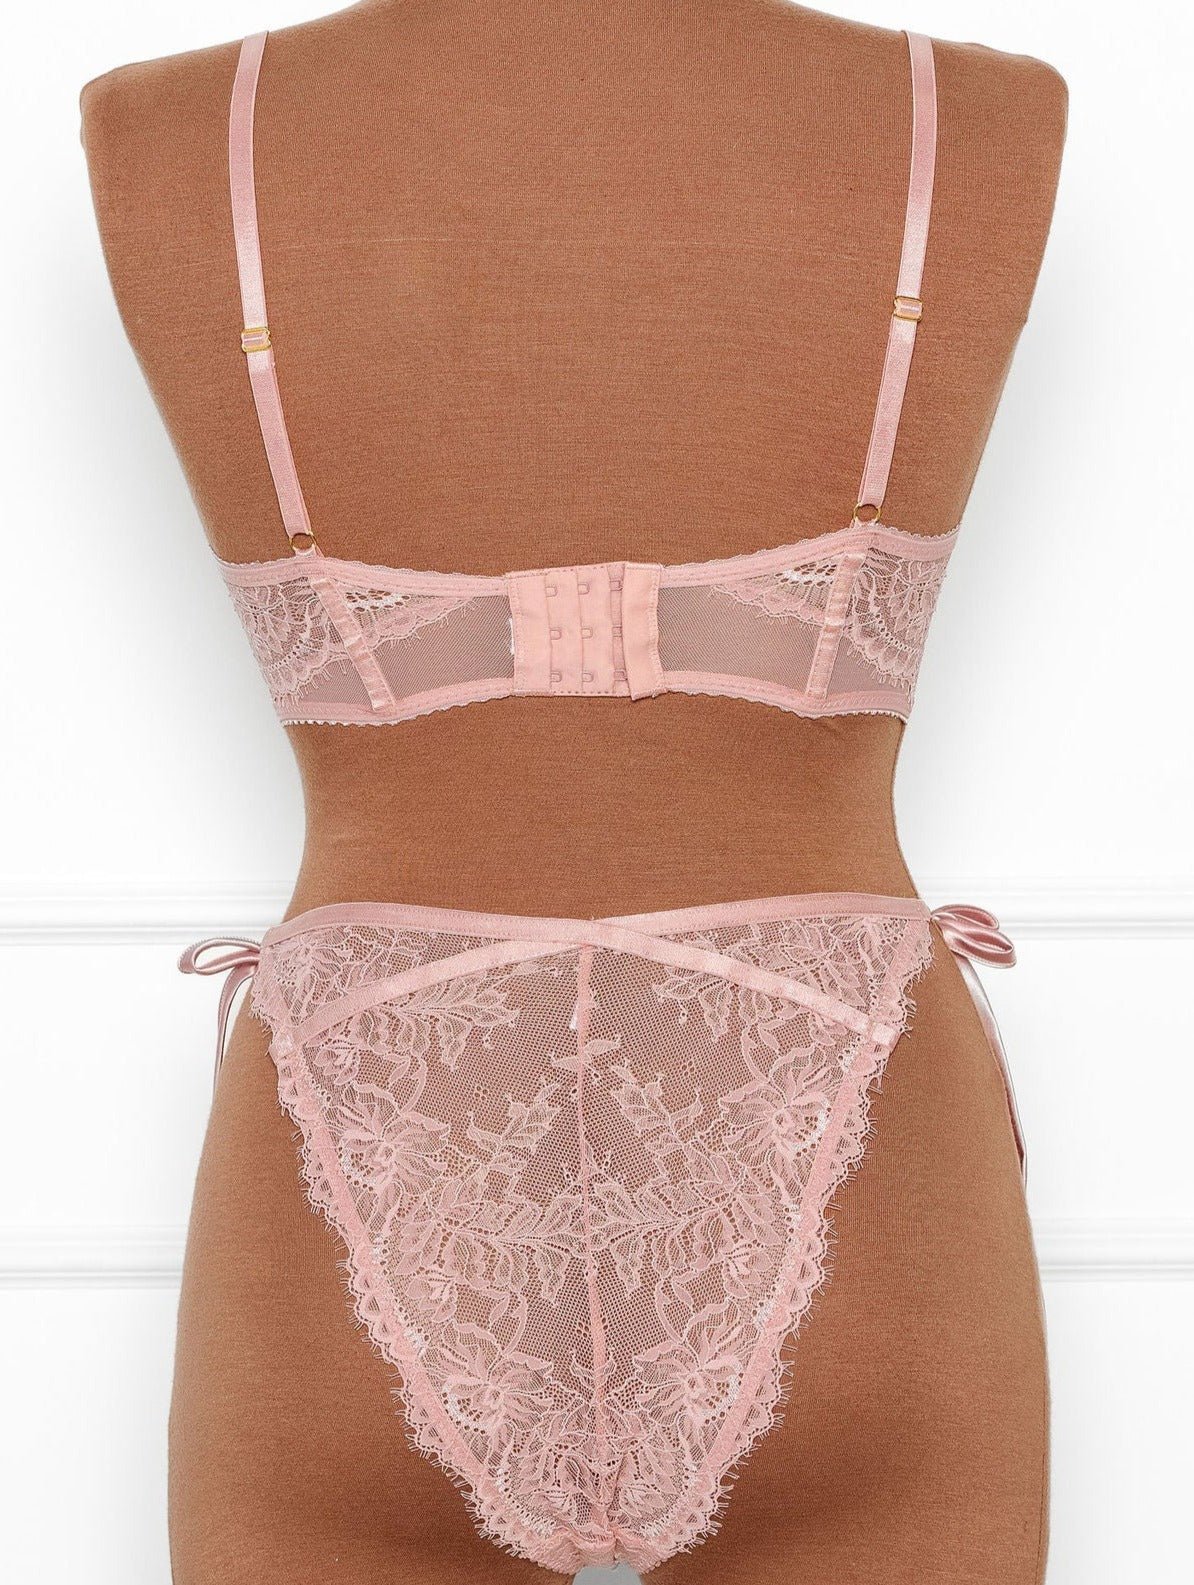 Lacy Side Tie Panty - Blush - Mentionables